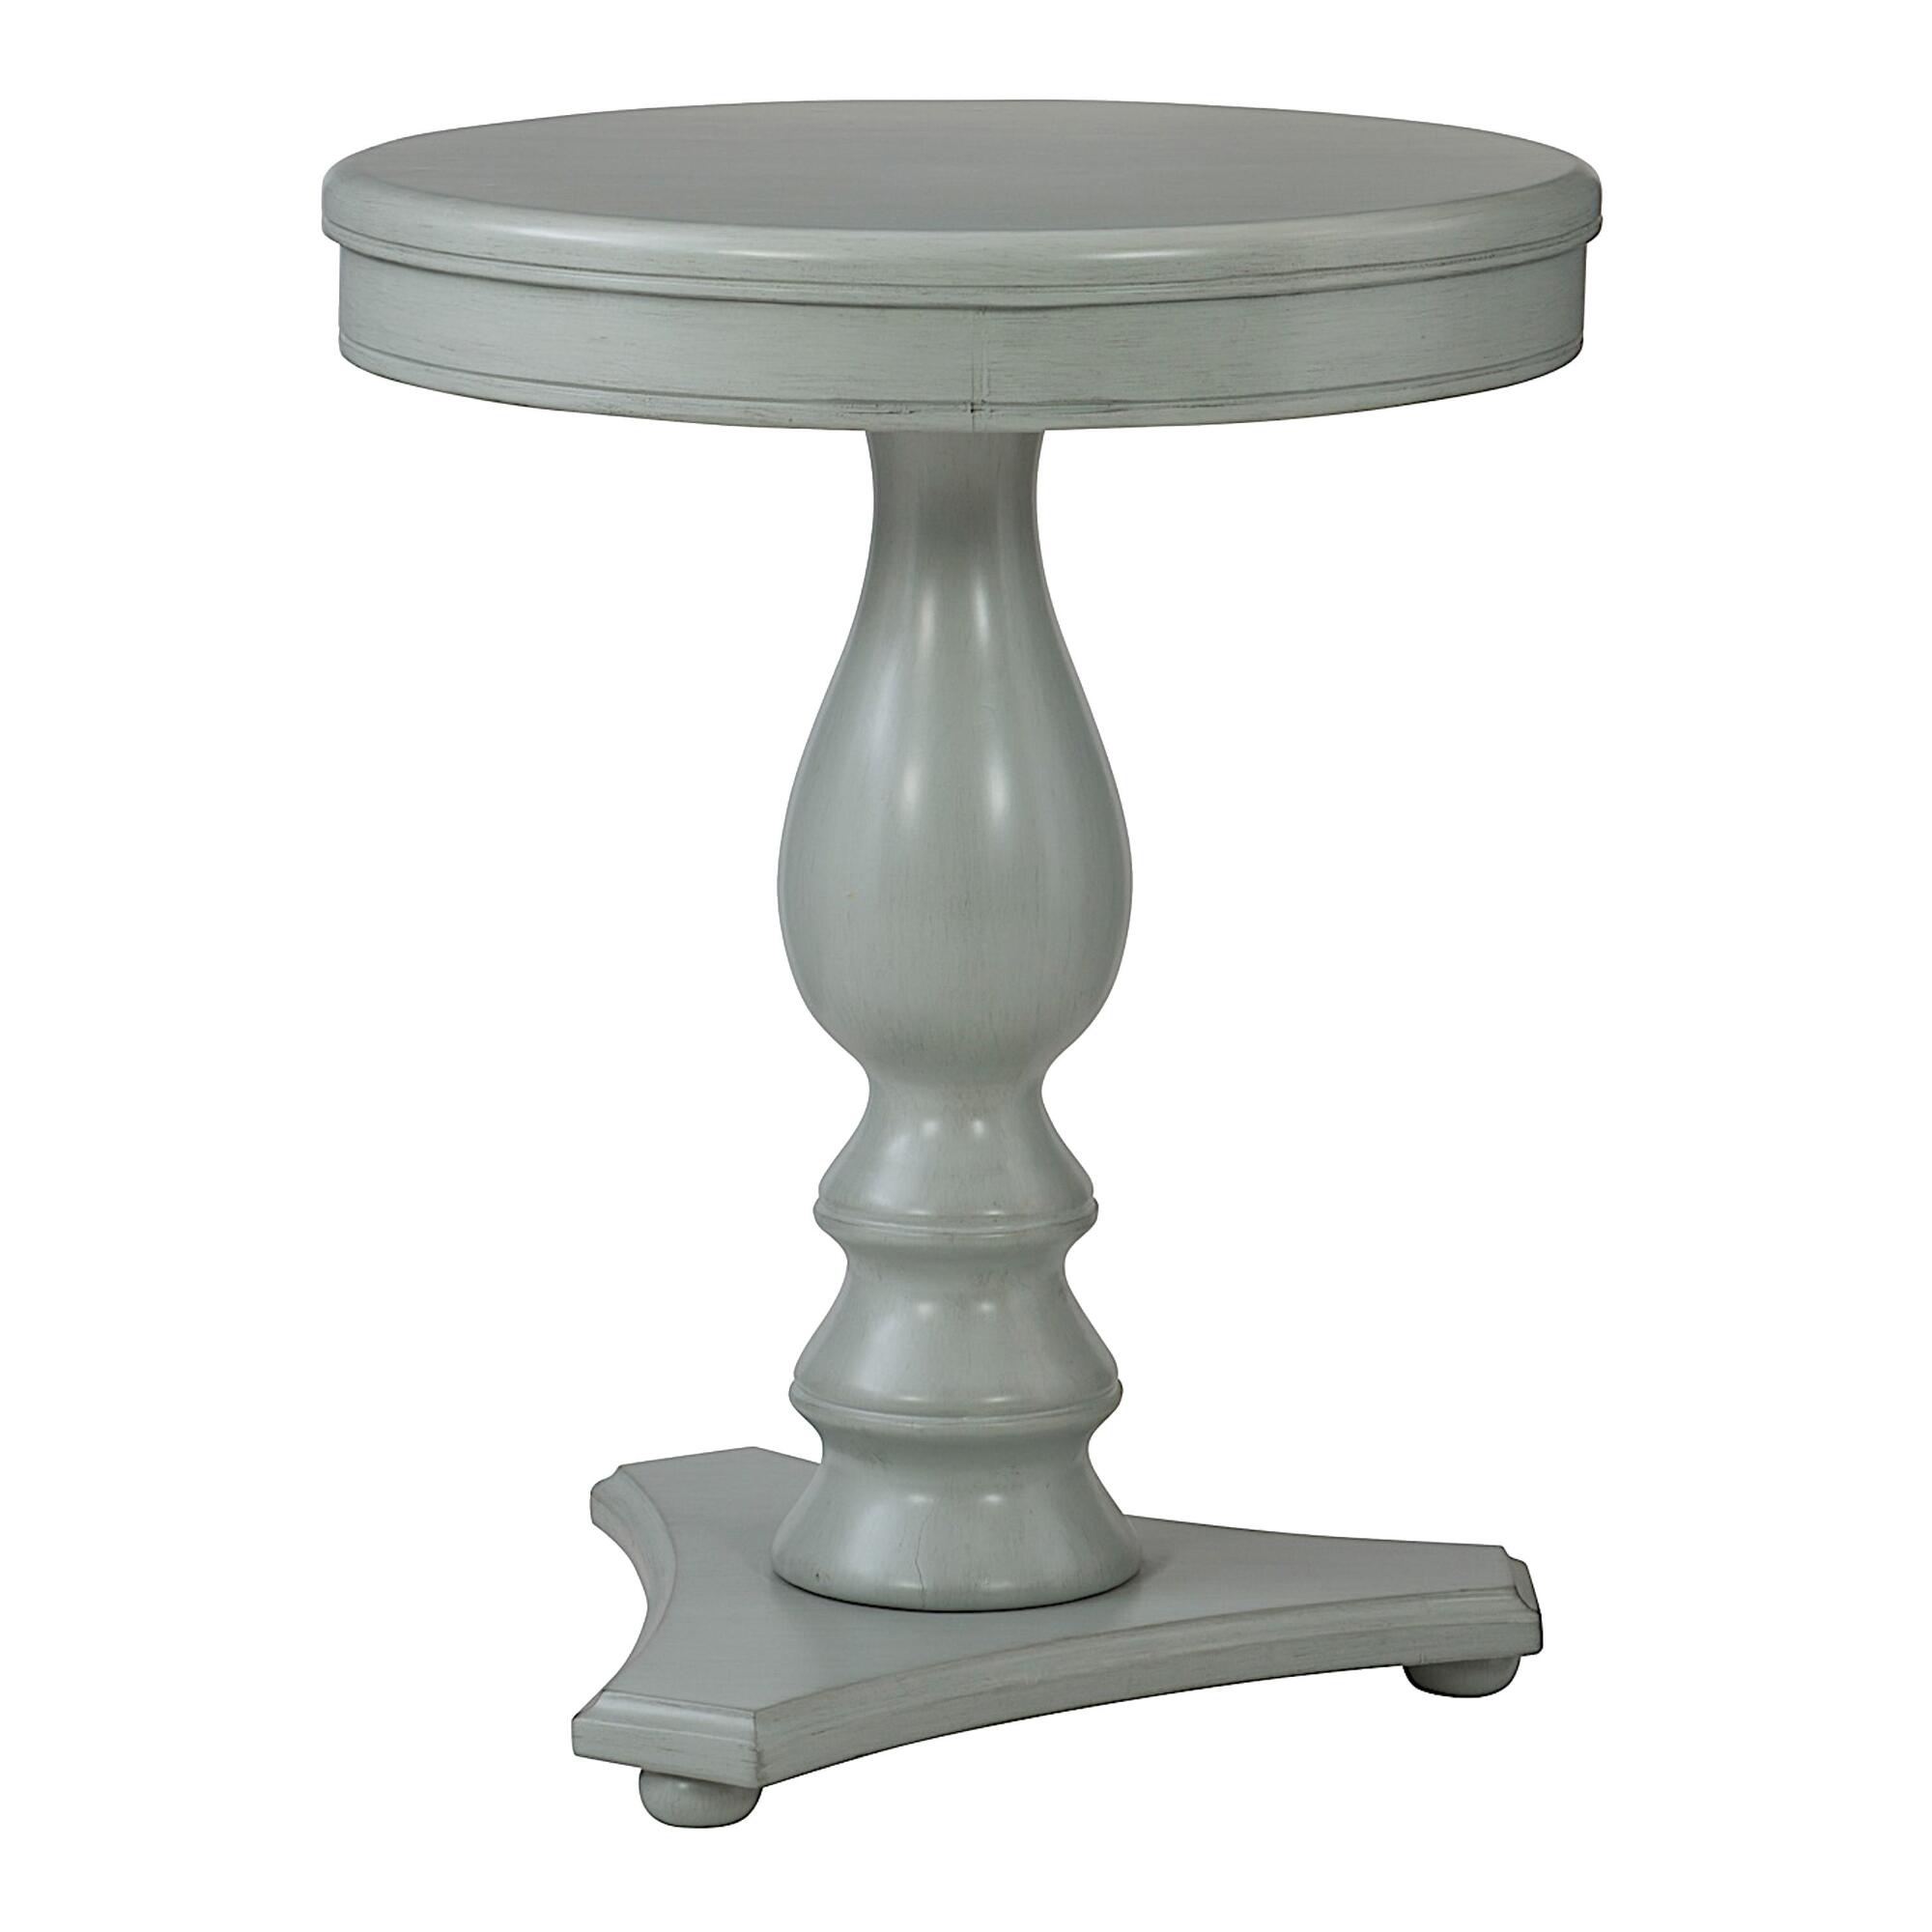 Wood Pedestal Belgravia Accent Table: Natural by World Market